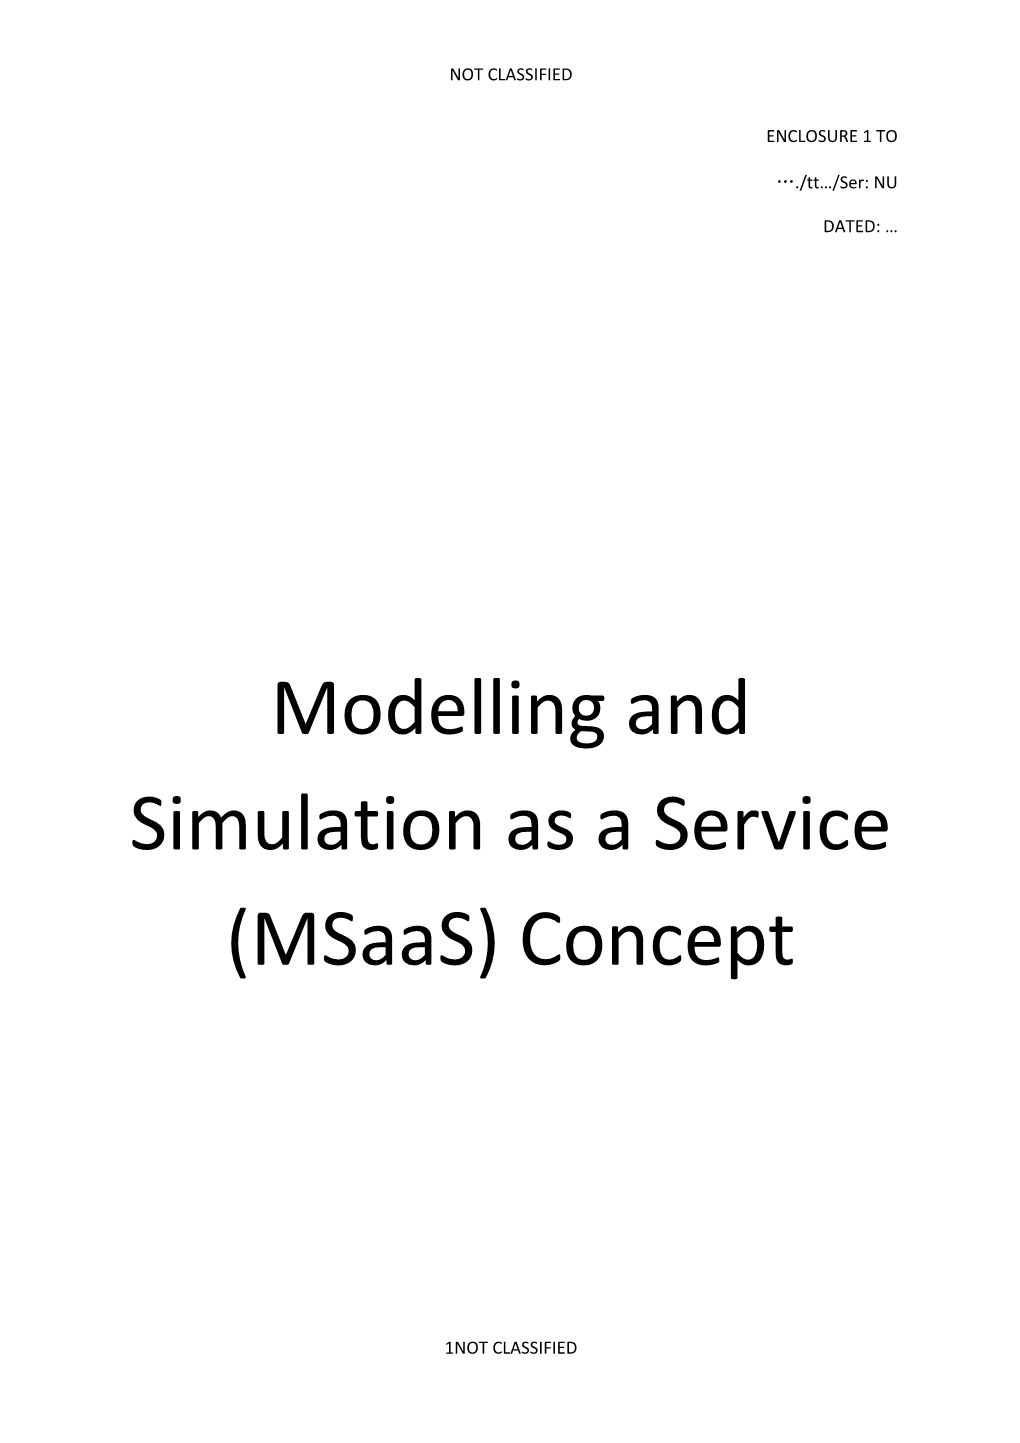 Modelling and Simulation As a Service (Msaas) Concept